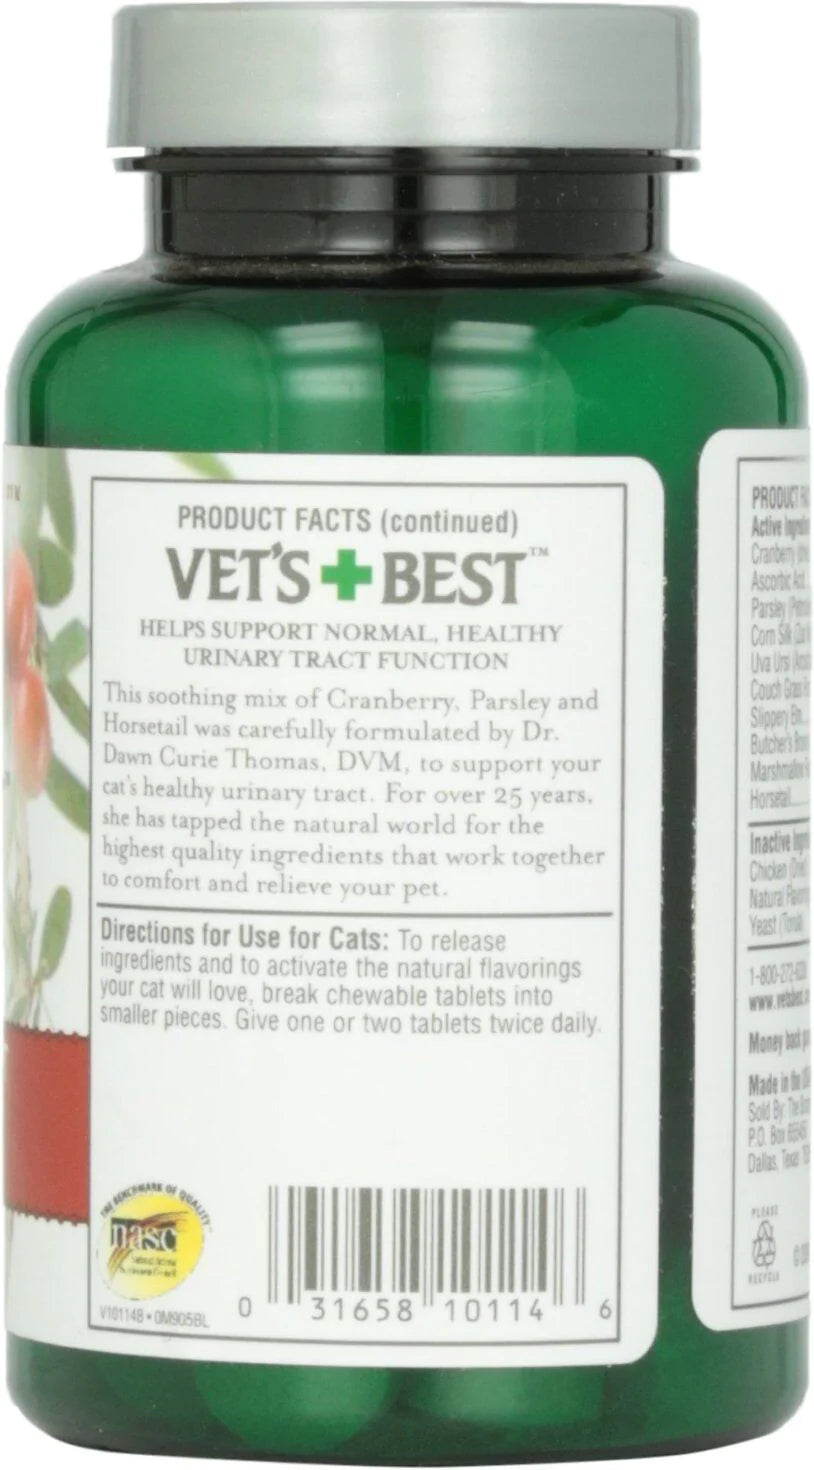 Vet's Best Urinary Tract Support Tablets for Cats 1ea/60 Tablets